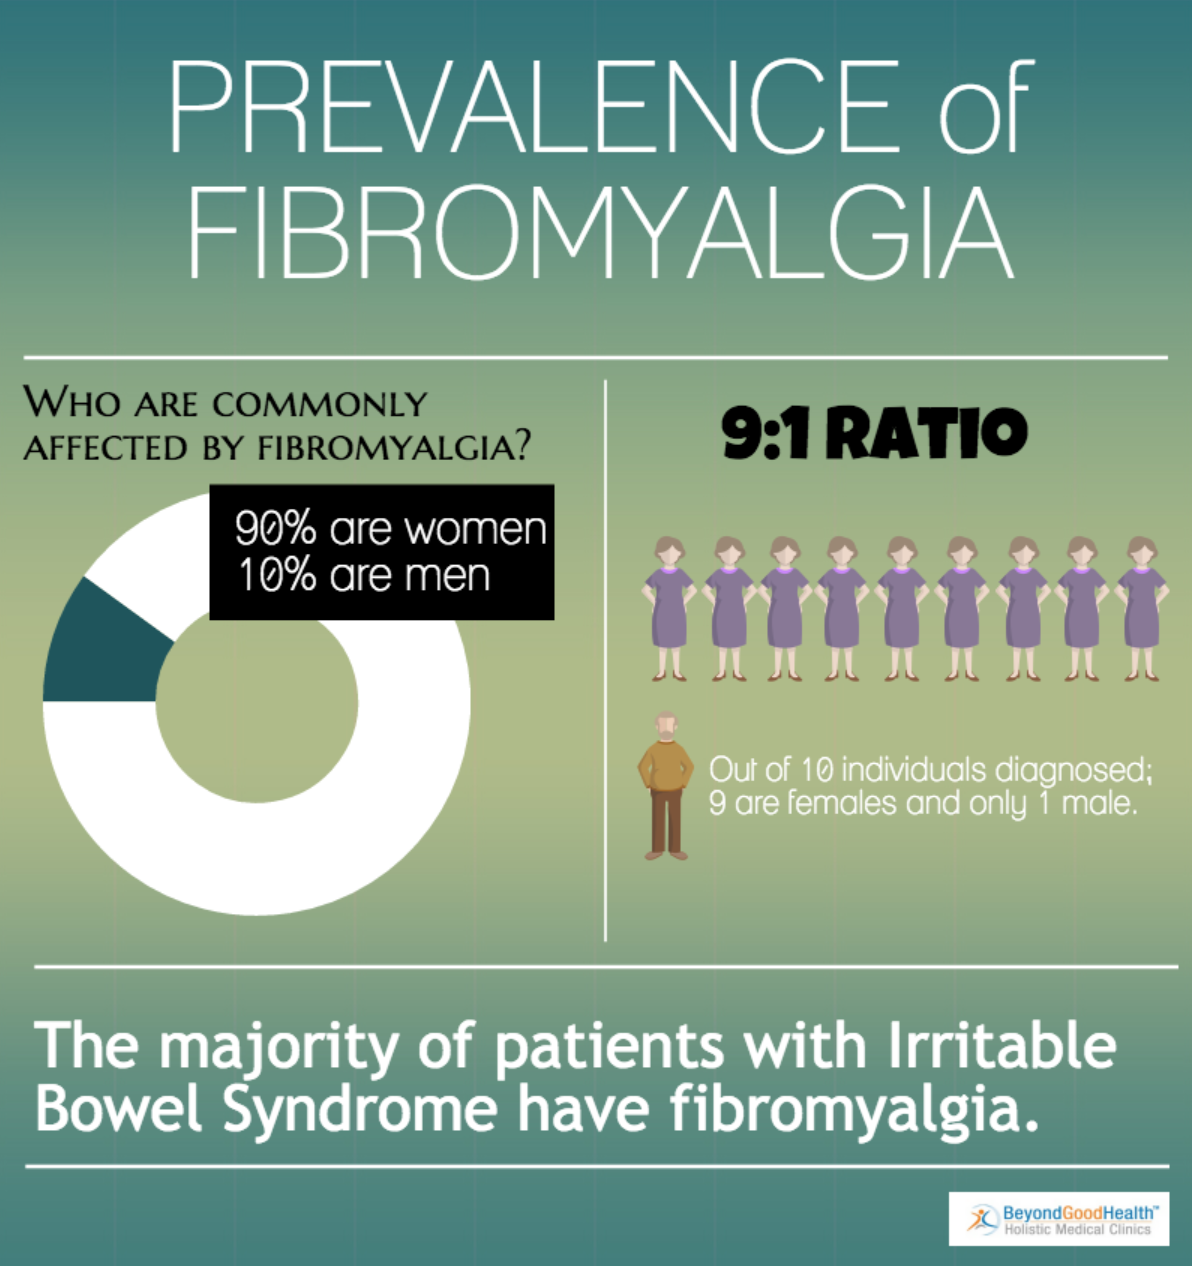 (Source: BeyondGoodHealth) A snapshot of 3rd party research into fibromyalgia demographics in Australia 